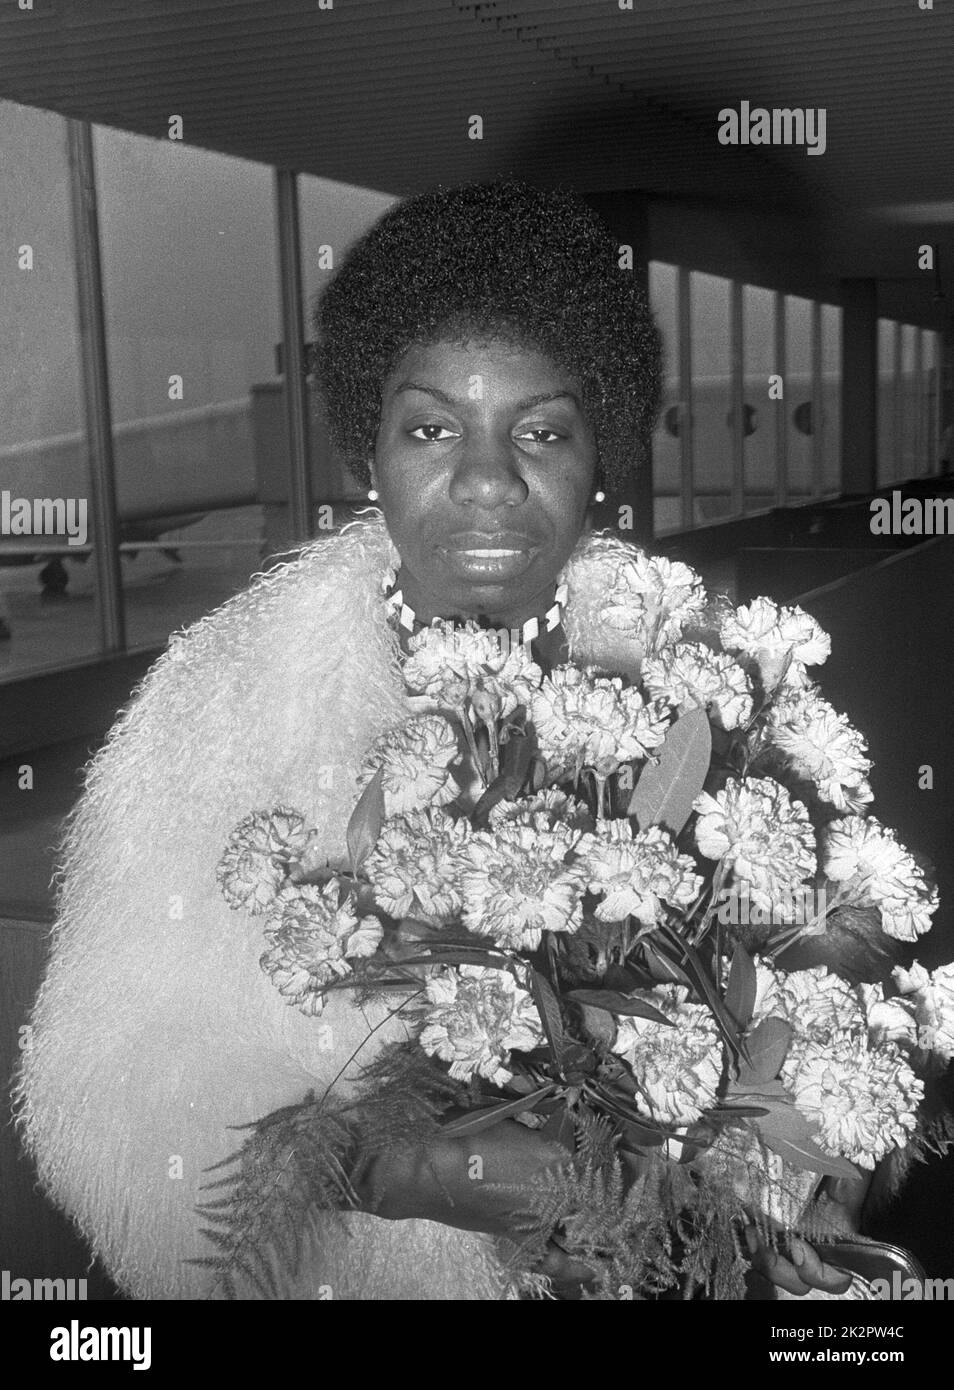 Nina Simone at Schiphol airport carrying a bouquet of flowers photographed by Jack de Nijs for Anefo - 1969 Stock Photo